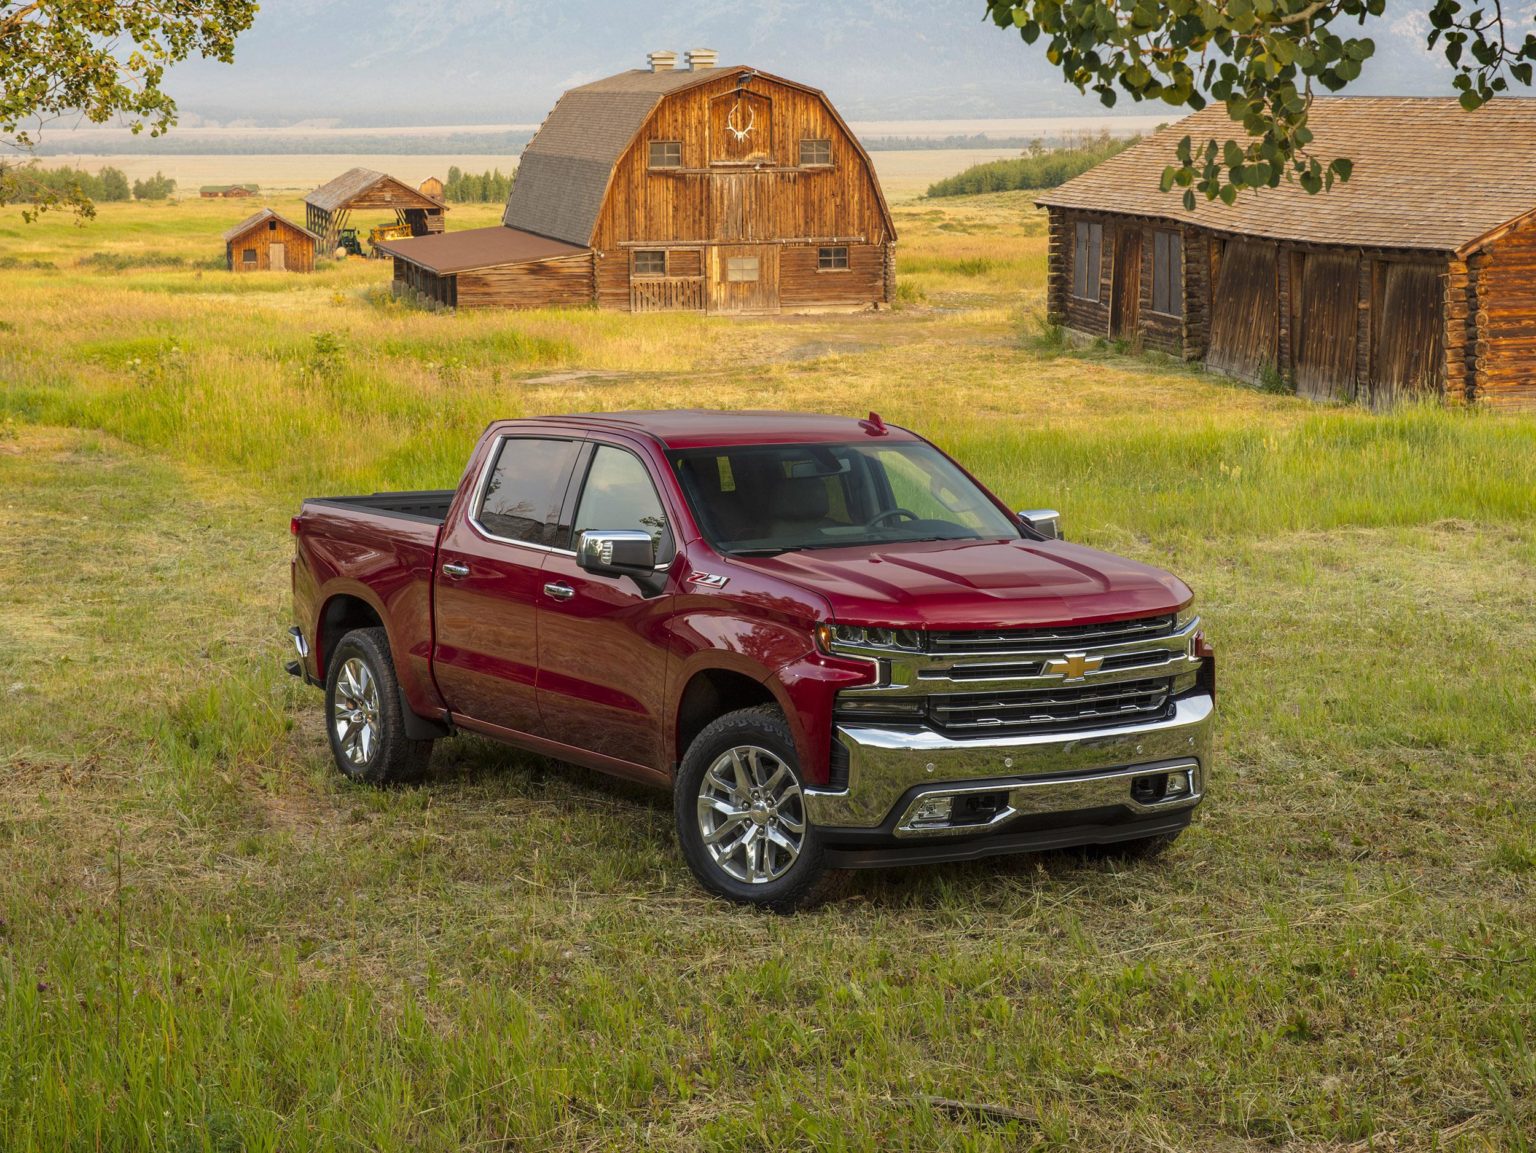 The Chevrolet Silverado is one of the most popular vehicles sold in the U.S.